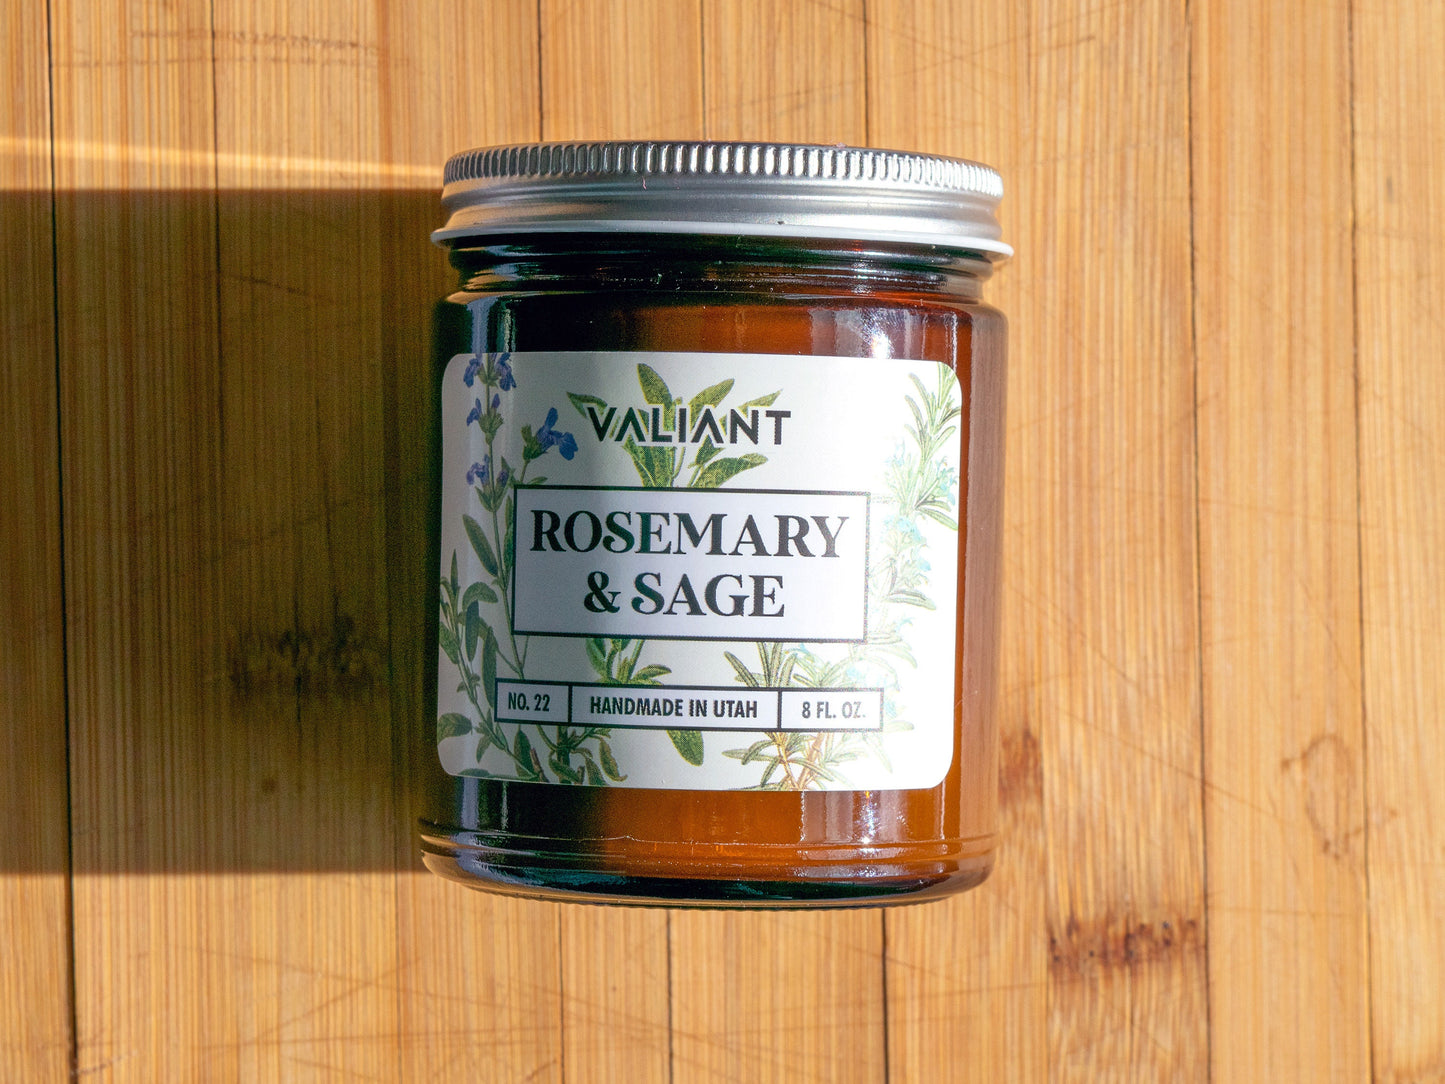 Rosemary & Sage Botanical Candle in Amber Glass